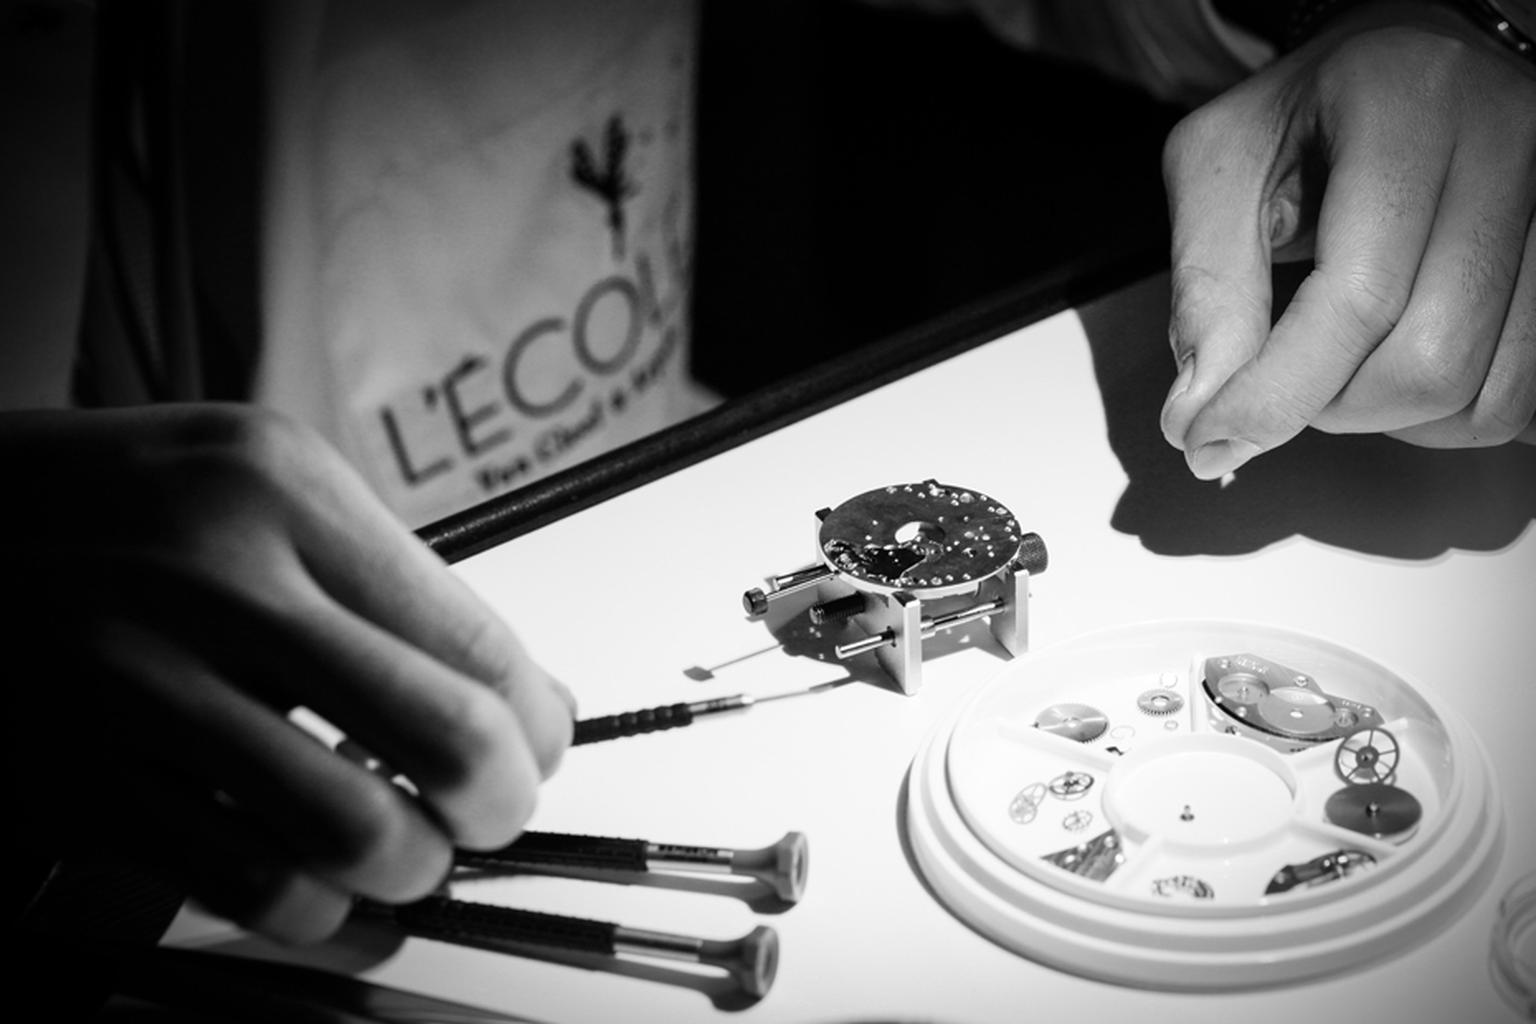 L'École Van Cleef & Arpels watchmaking workshop enables students to learn the intricacies of the mechanical watch. © Van Cleef & Arpels.